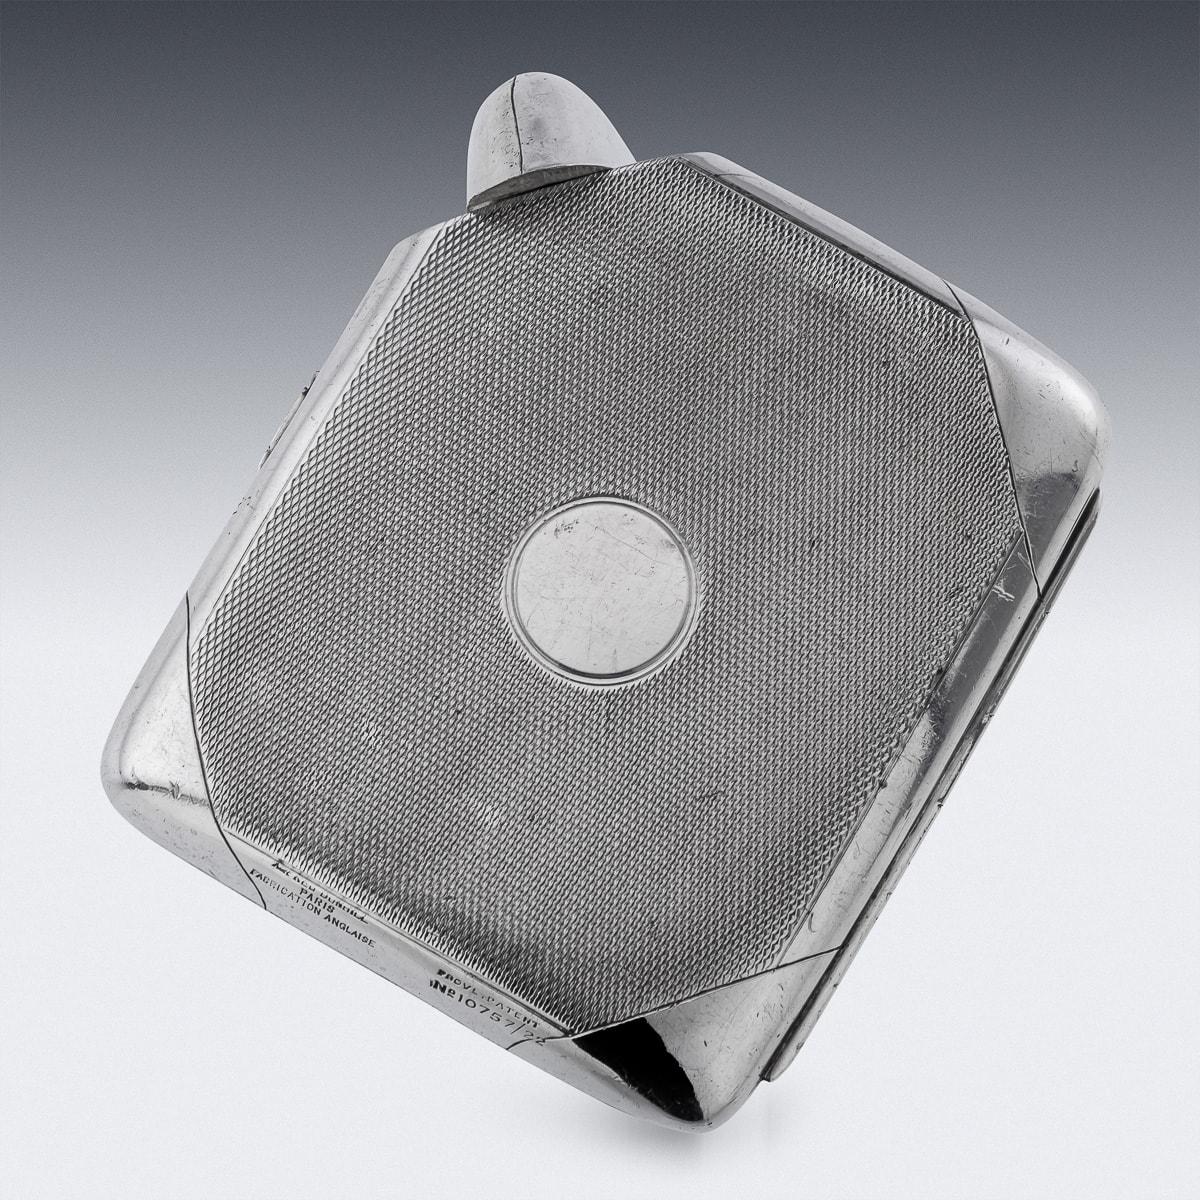 Antique early 20th Century Dunhill silver plated cigarette case shaped hip flask with a consealed twist list. This case was made in Britain (Fabrication Anglaise), patent number 10757/22, Dunhill. Crafted during the legendary era of prohibition,